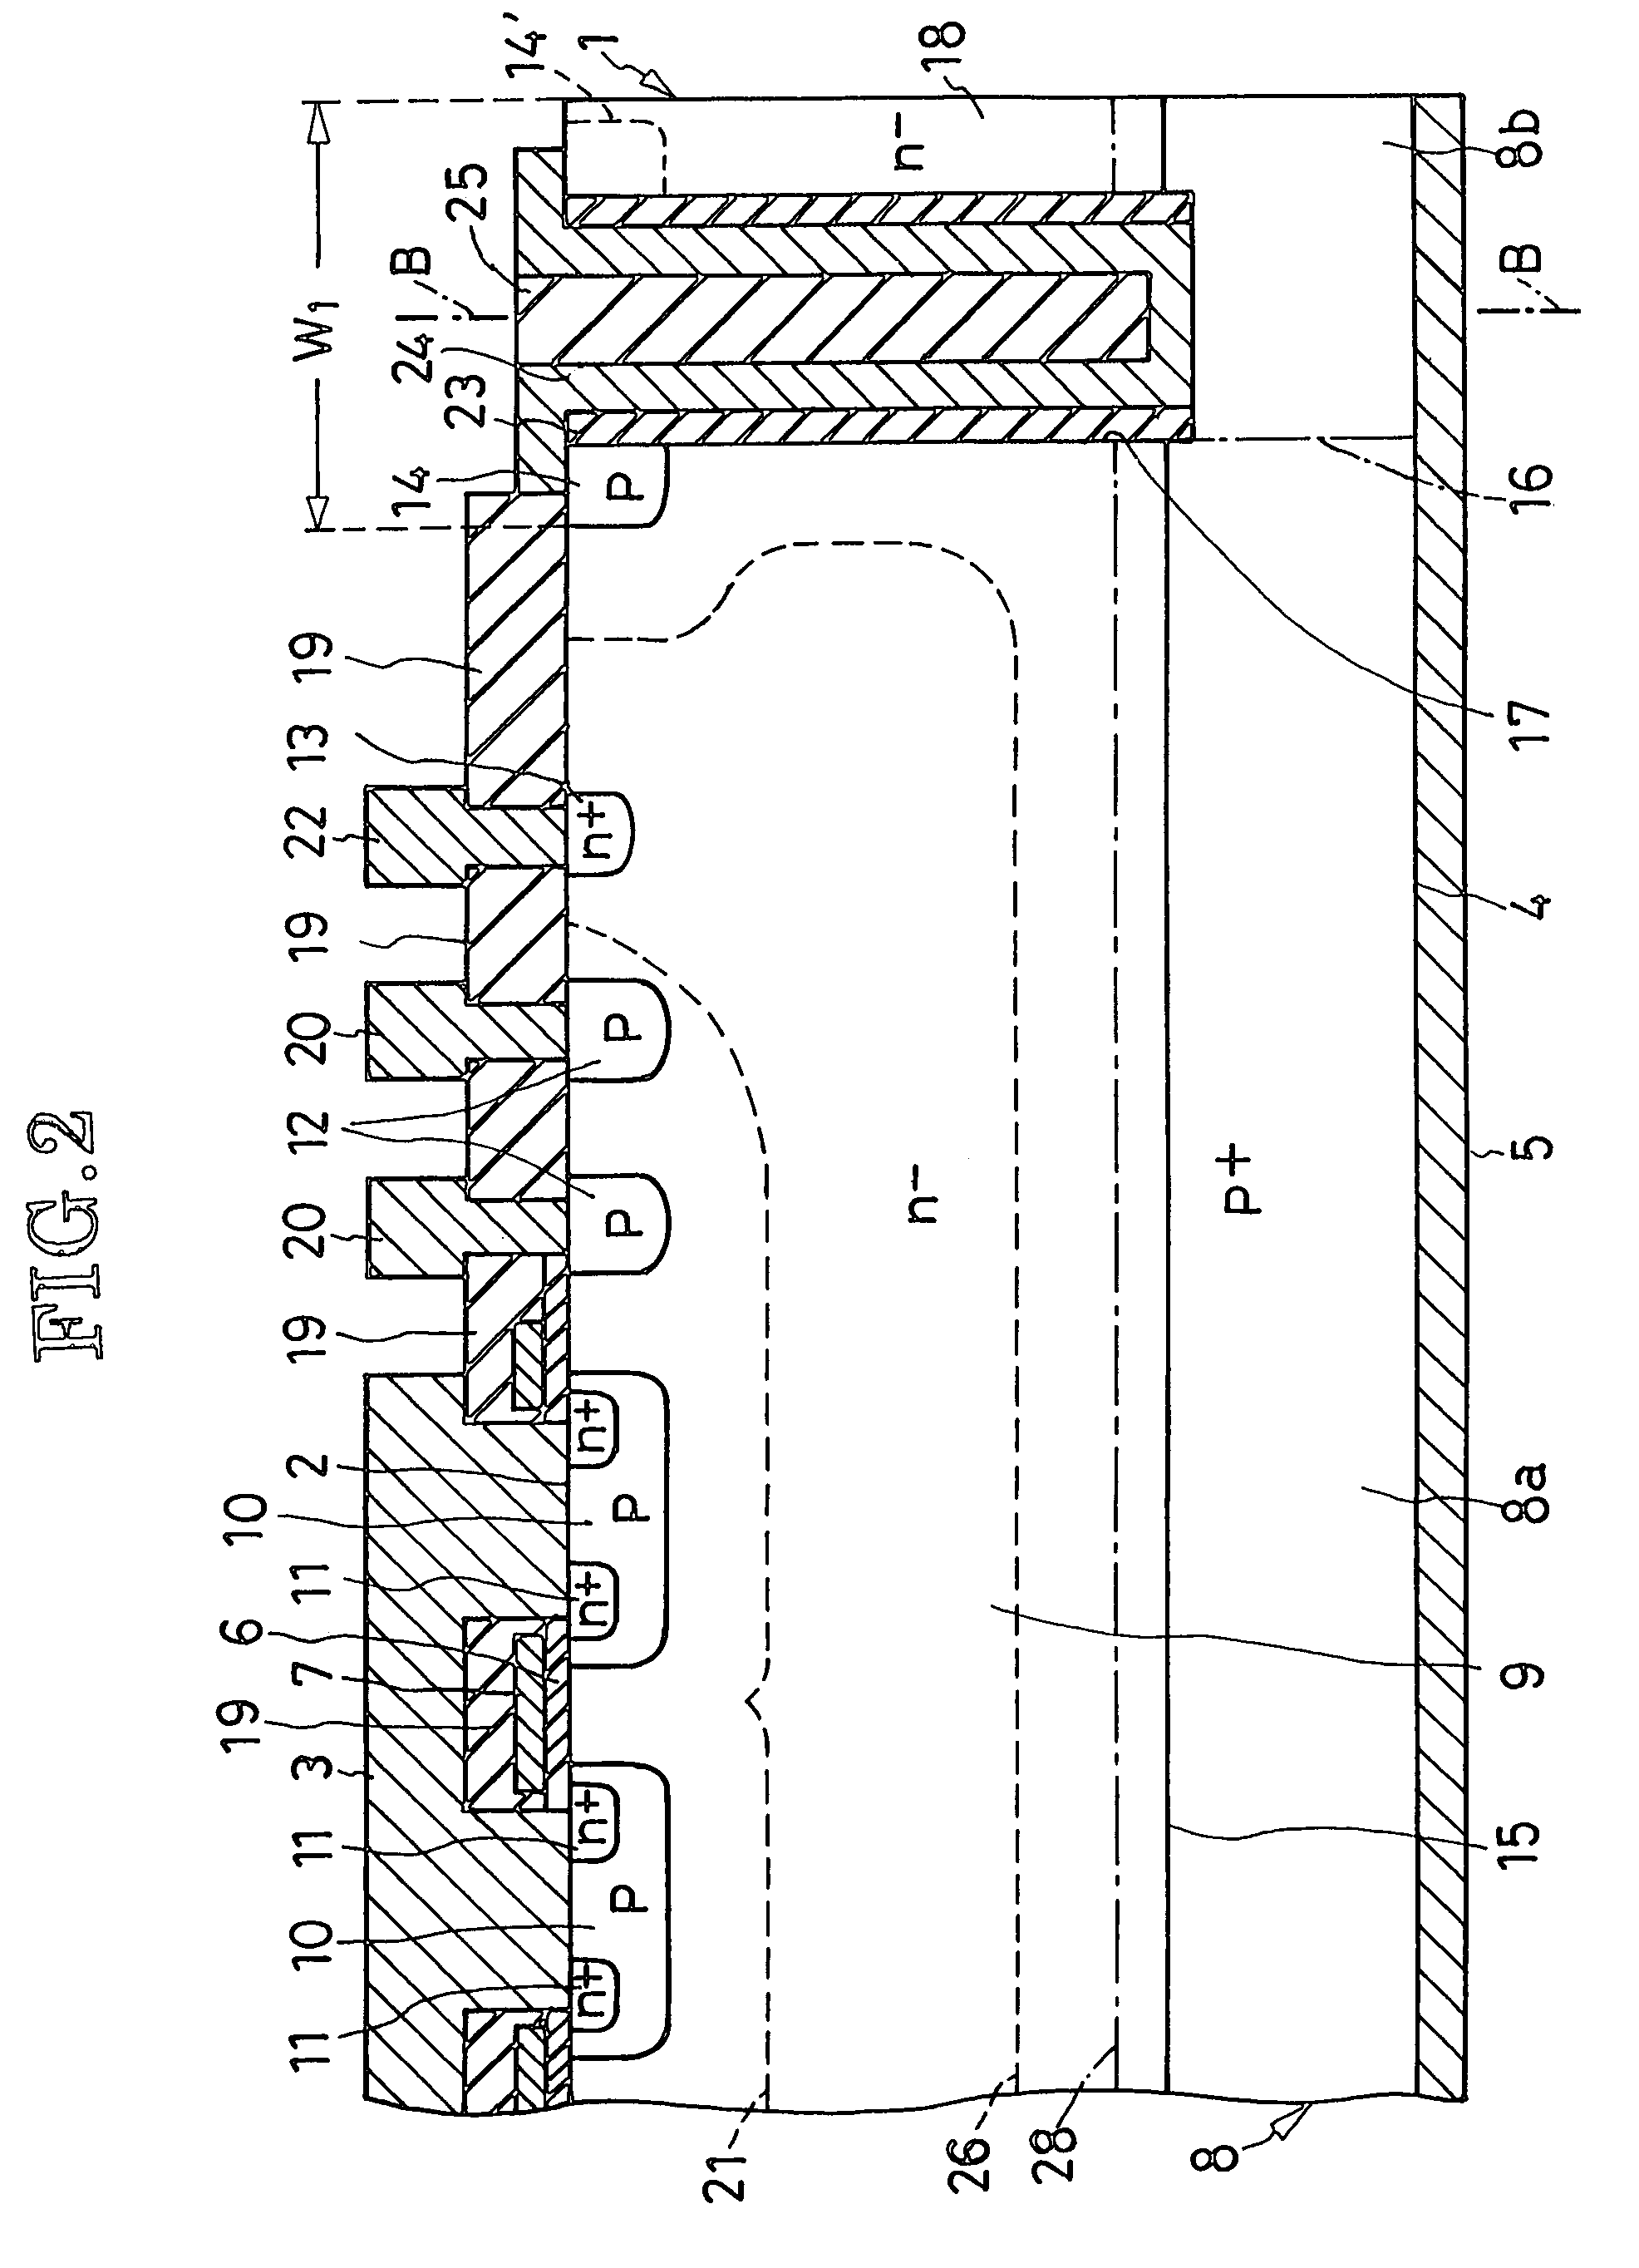 IGBT or like semiconductor device of high voltage-withstanding capability